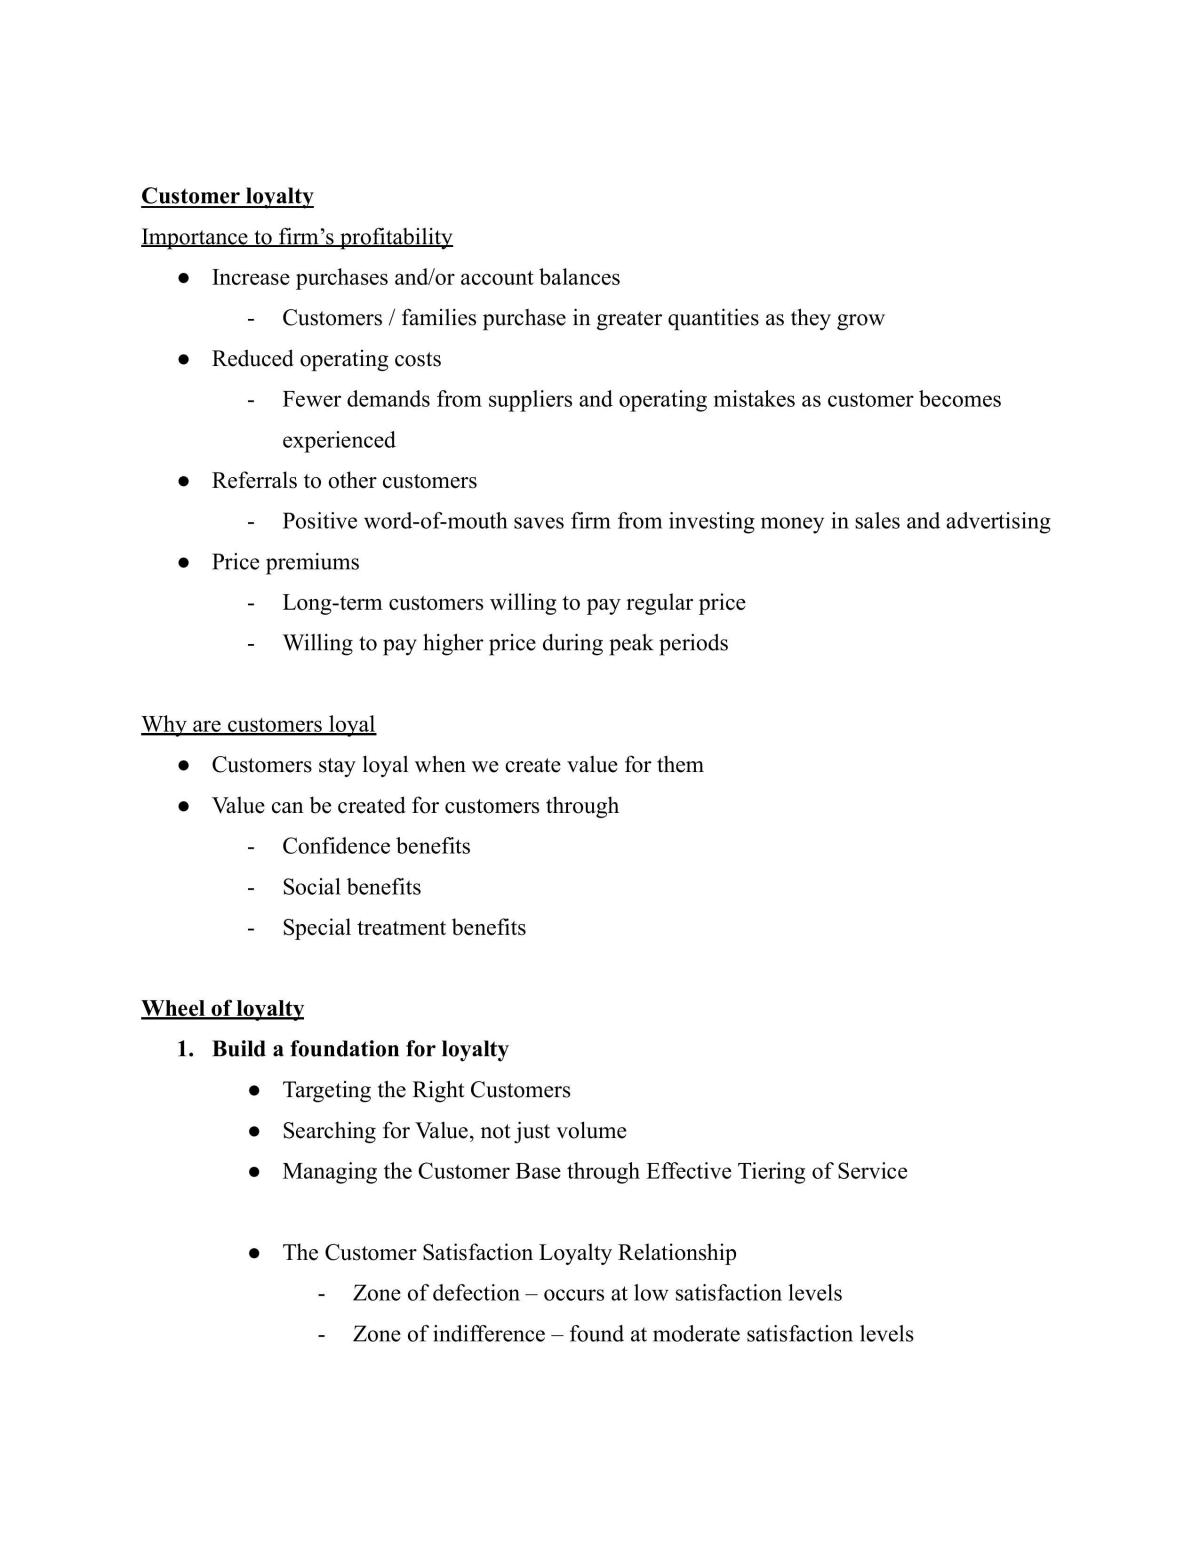 MKT363 Notes - Page 24